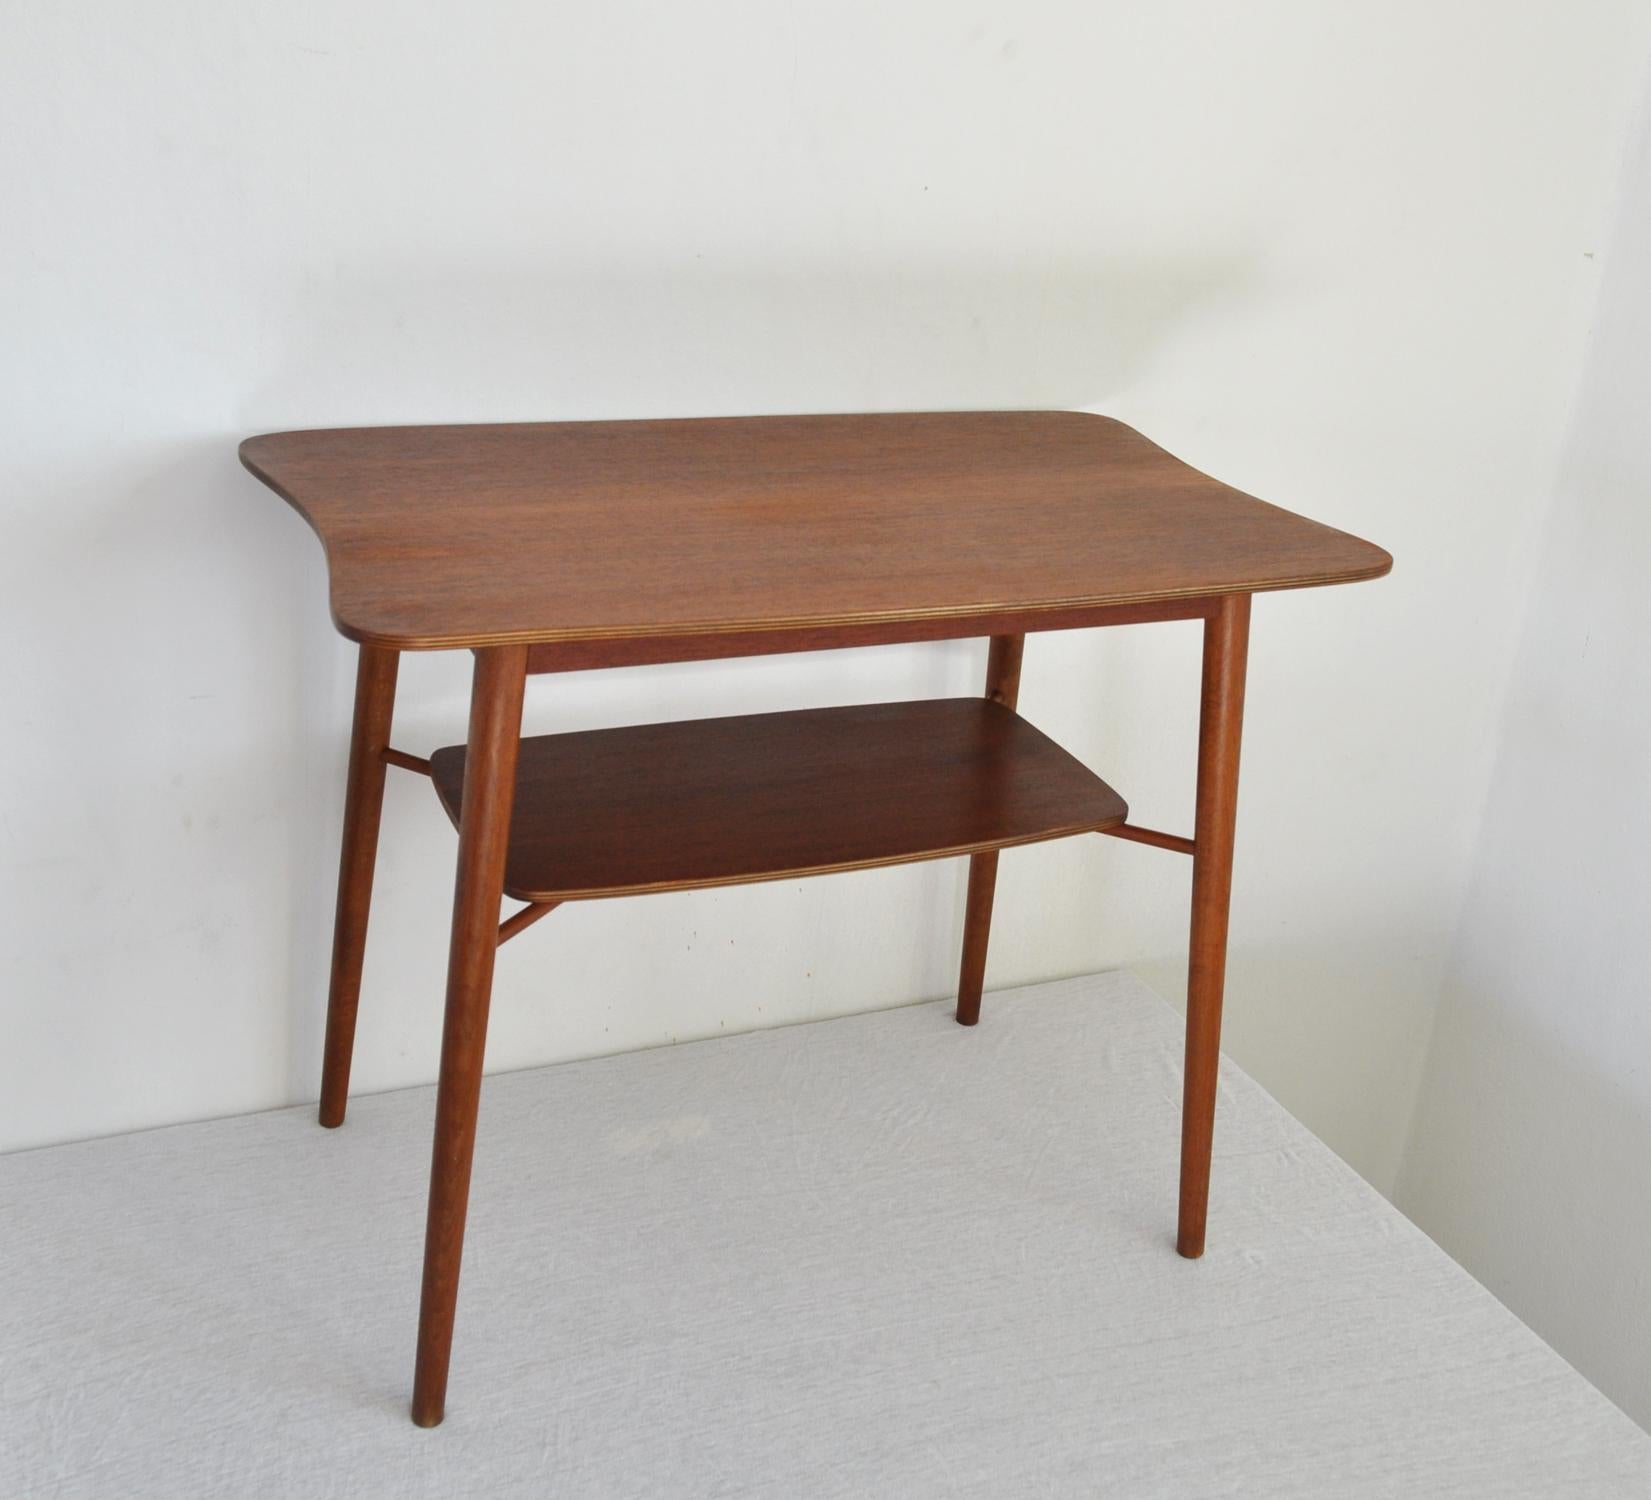 Scandinavian Modern Midcentury Occasional Teak Side Table with a Organic Shape, 1960s